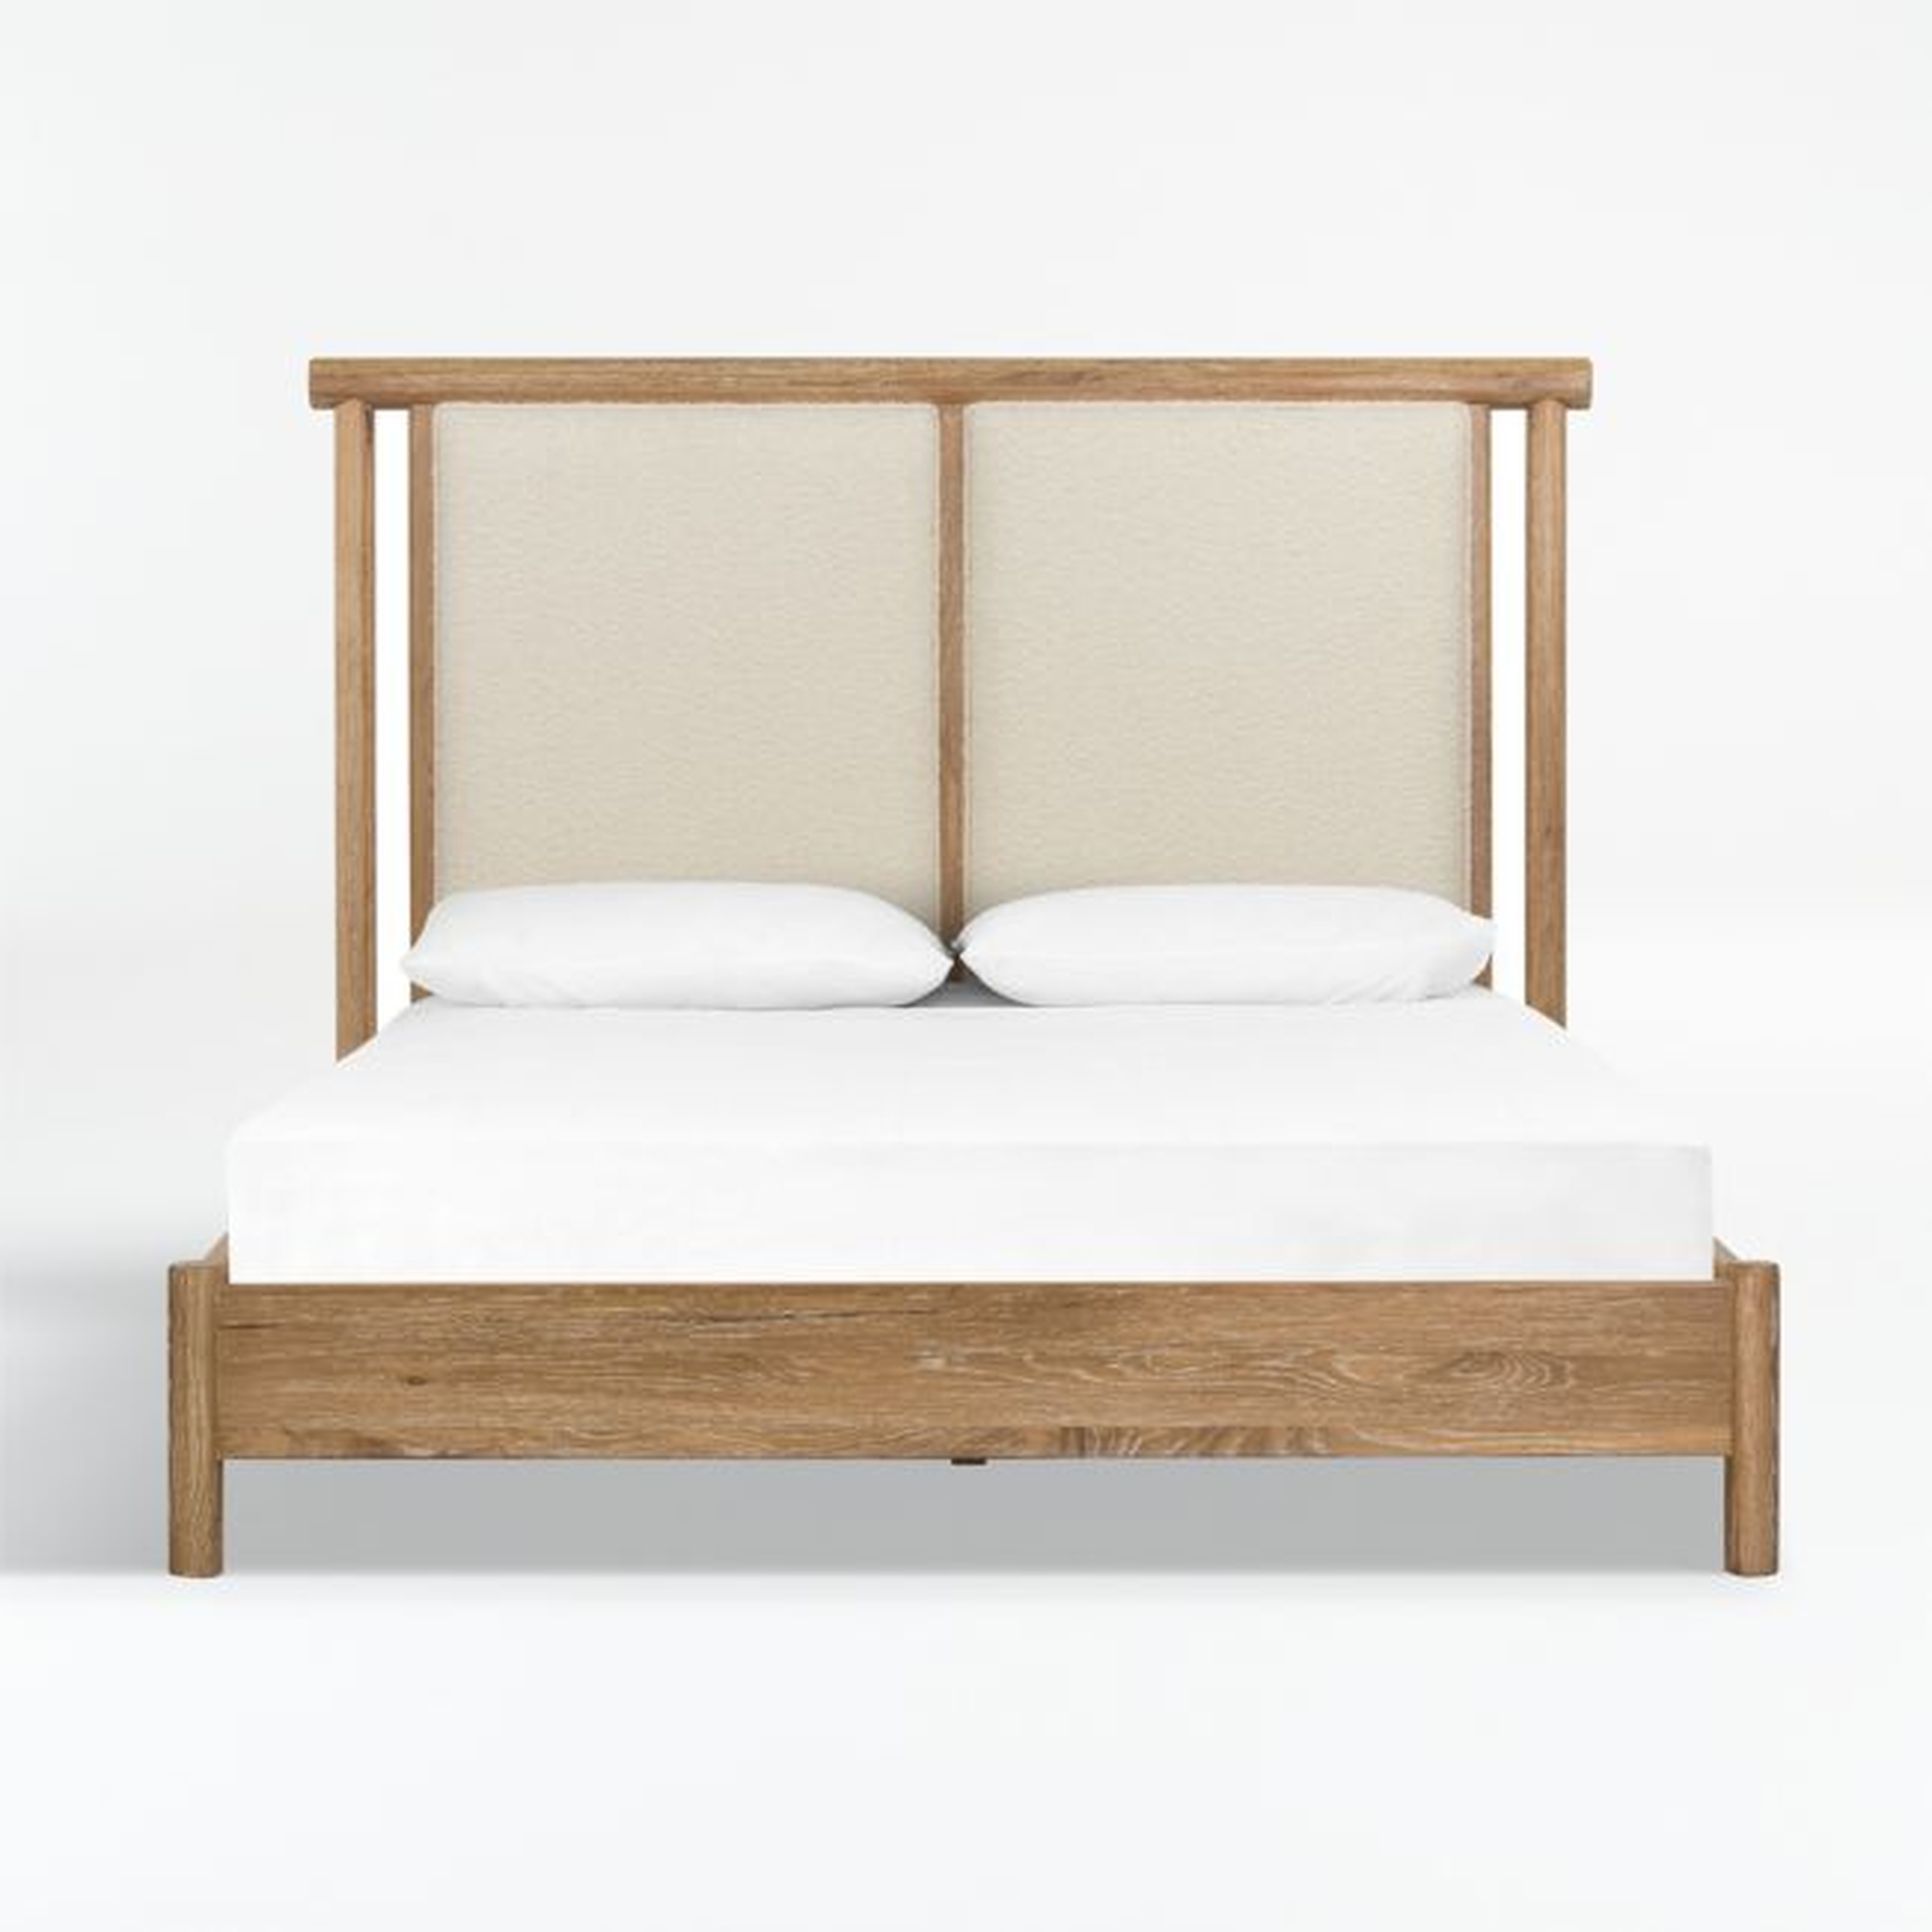 Edgebrook King Upholstered Wood Bed - Crate and Barrel